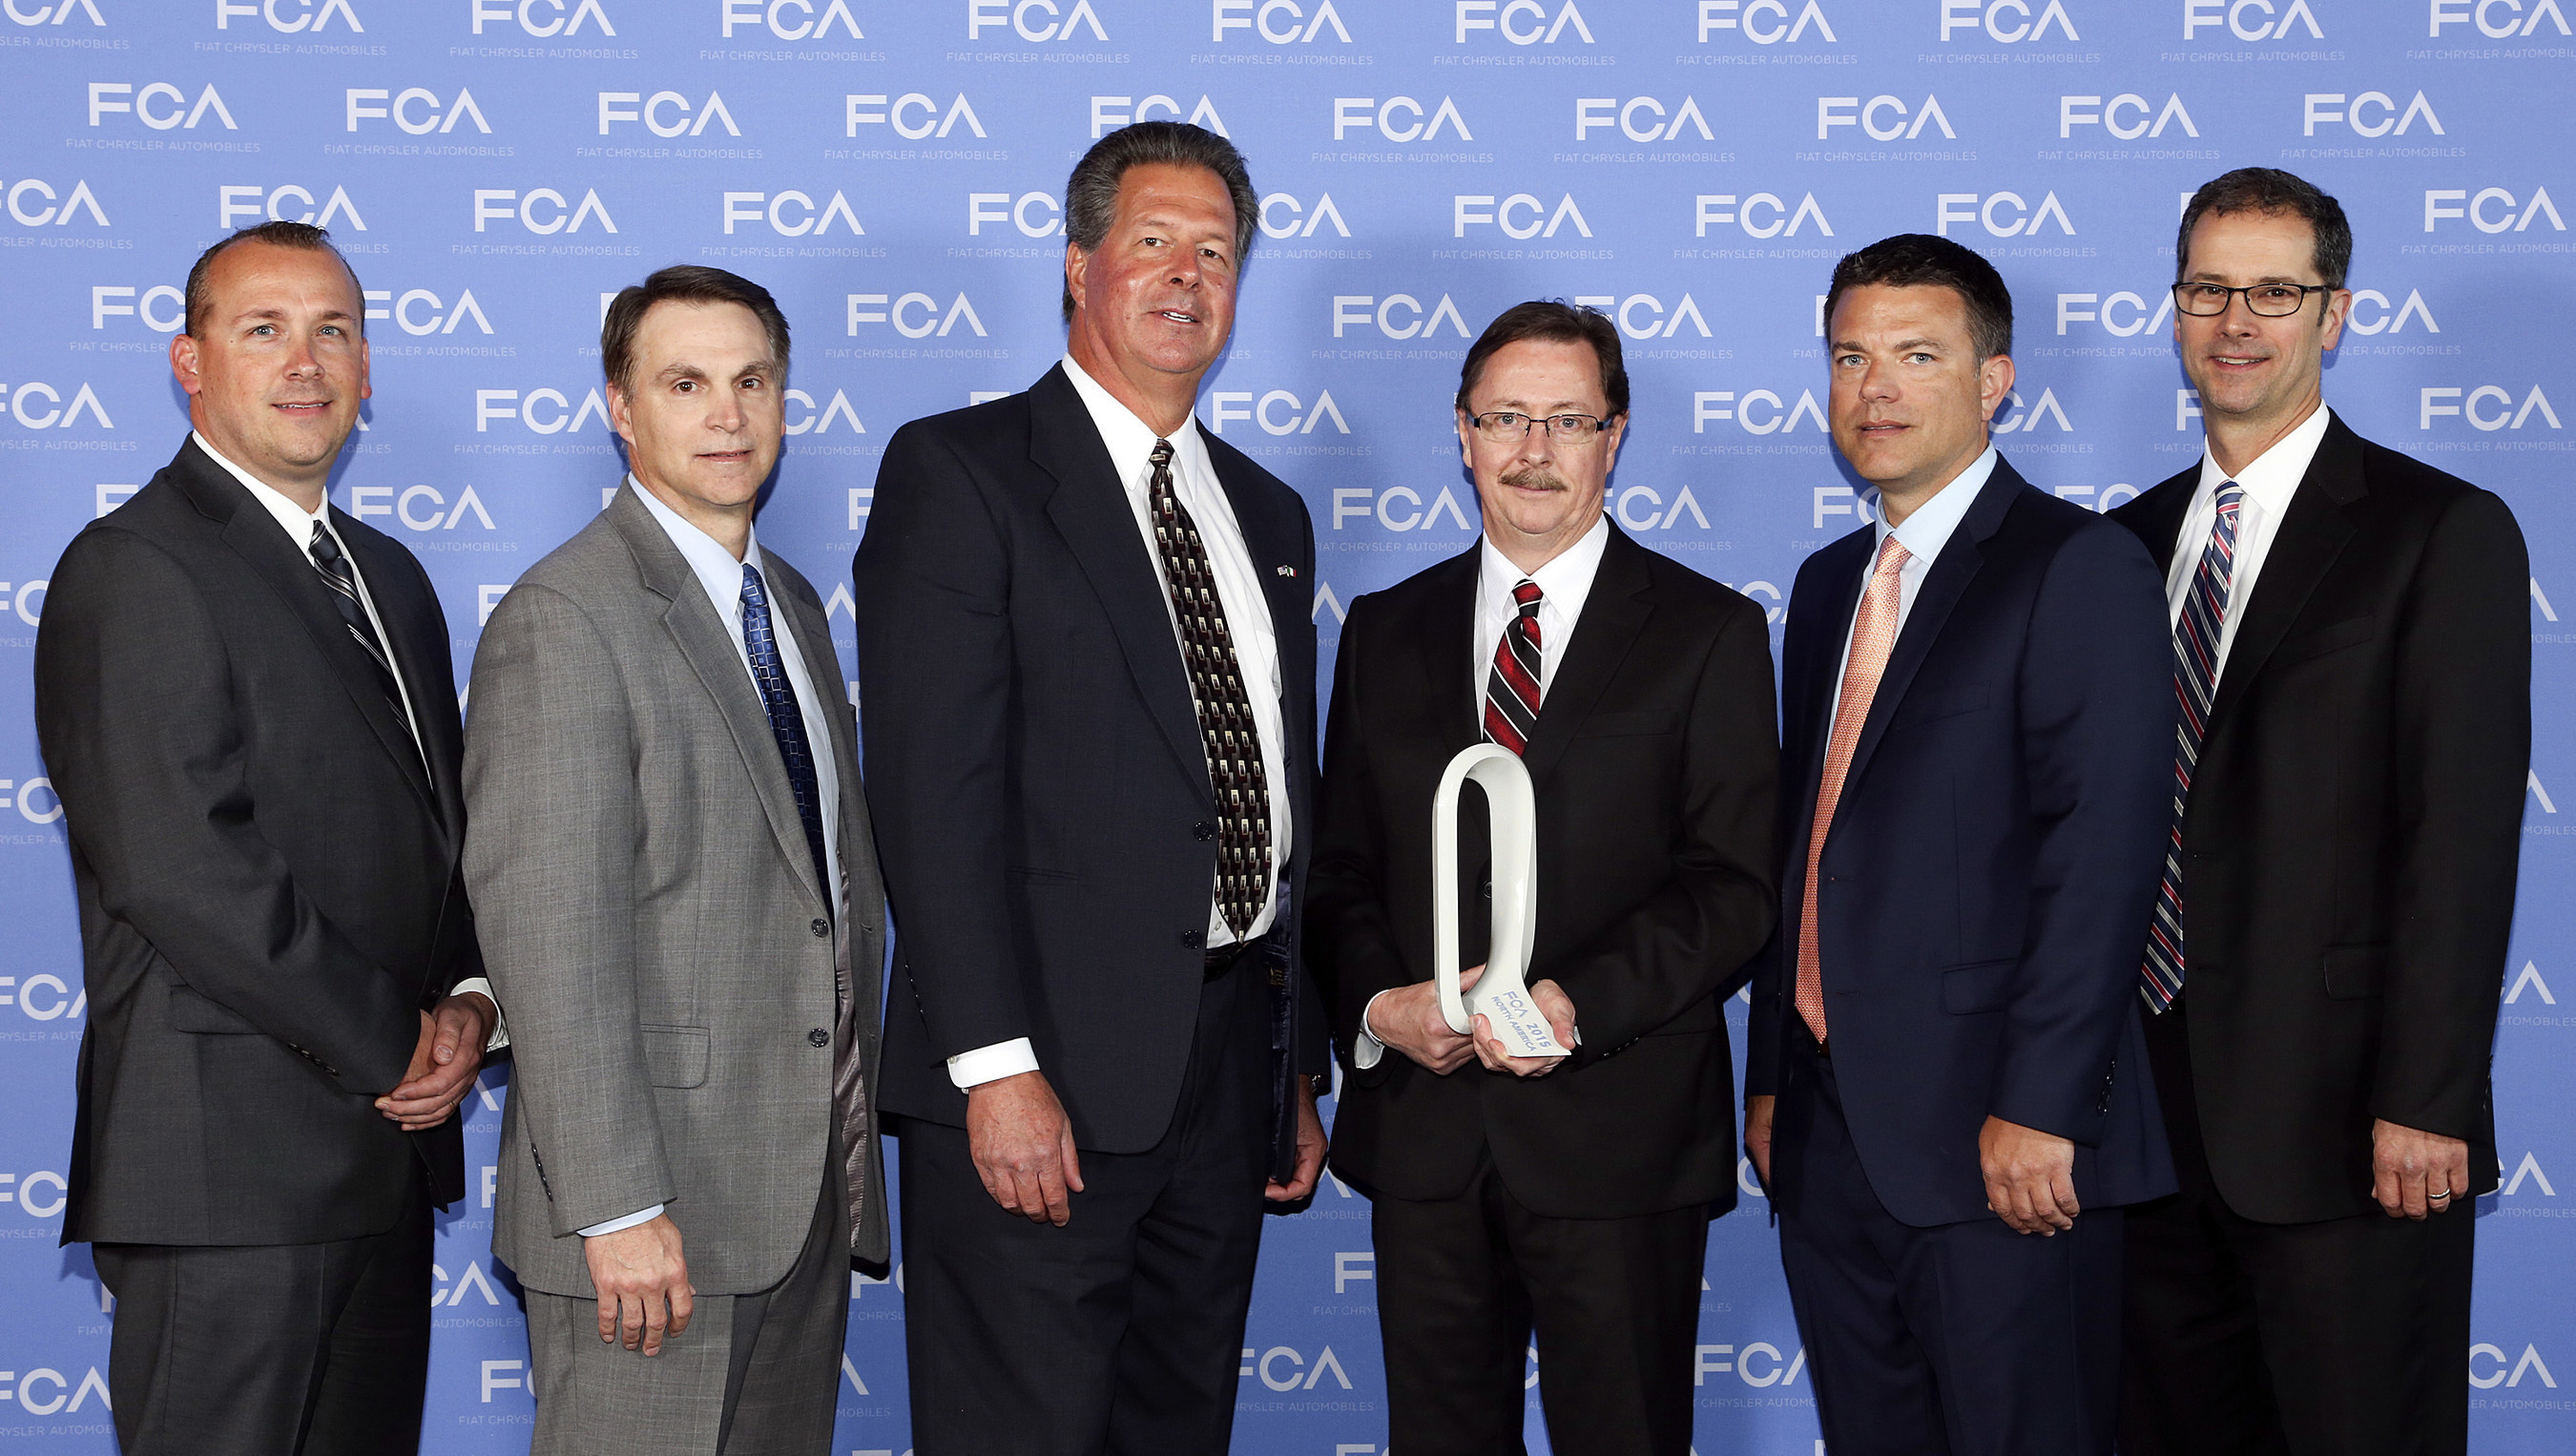 Vari-Form was honored as 2015 Supplier of the Year for Supply Chain Management during the Qualitas Annual Strategy Meeting and Supplier Awards Ceremony held recently at the MotorCity Hotel in Detroit. Scott Garberding, Head of Group Purchasing, Fiat Chrysler Automobiles N.V. (FCA) (at right), and Tom Finelli, Head of North America Group Purchasing FCA US (to his right), presented the award to Vari-Form executives Doug Viohl and Randy Nicholls (center). Also present were Christopher Barrette...